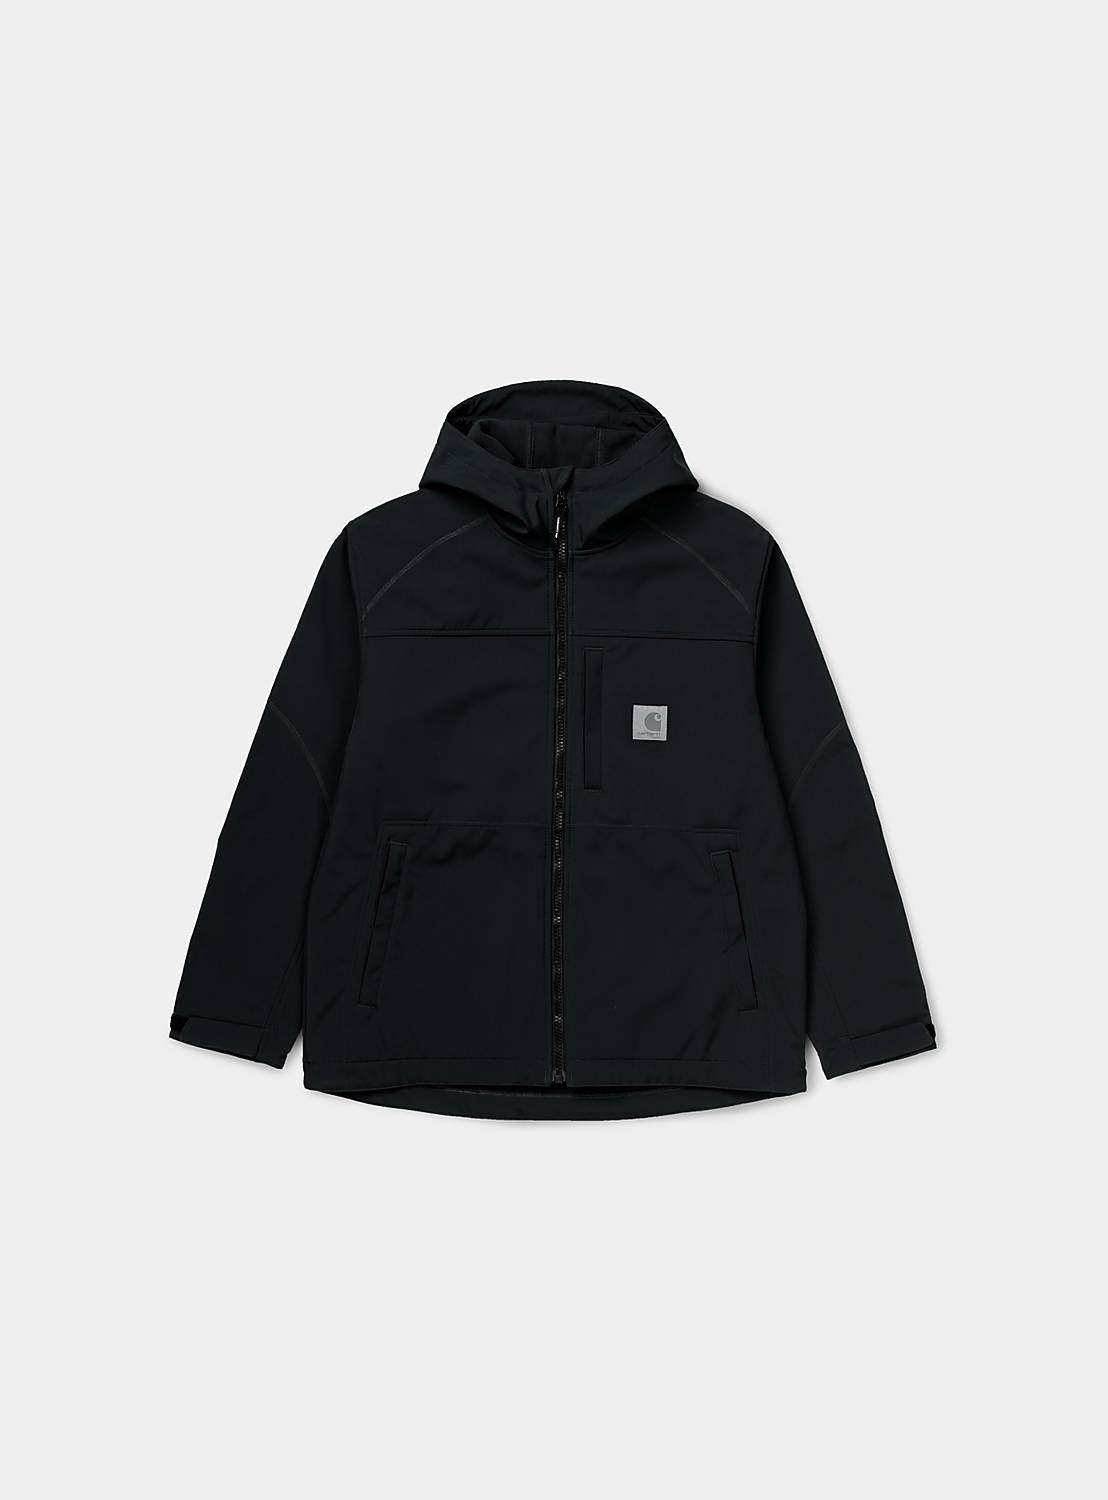 Page 5 Men's Jackets and Coats | Carhartt WIP